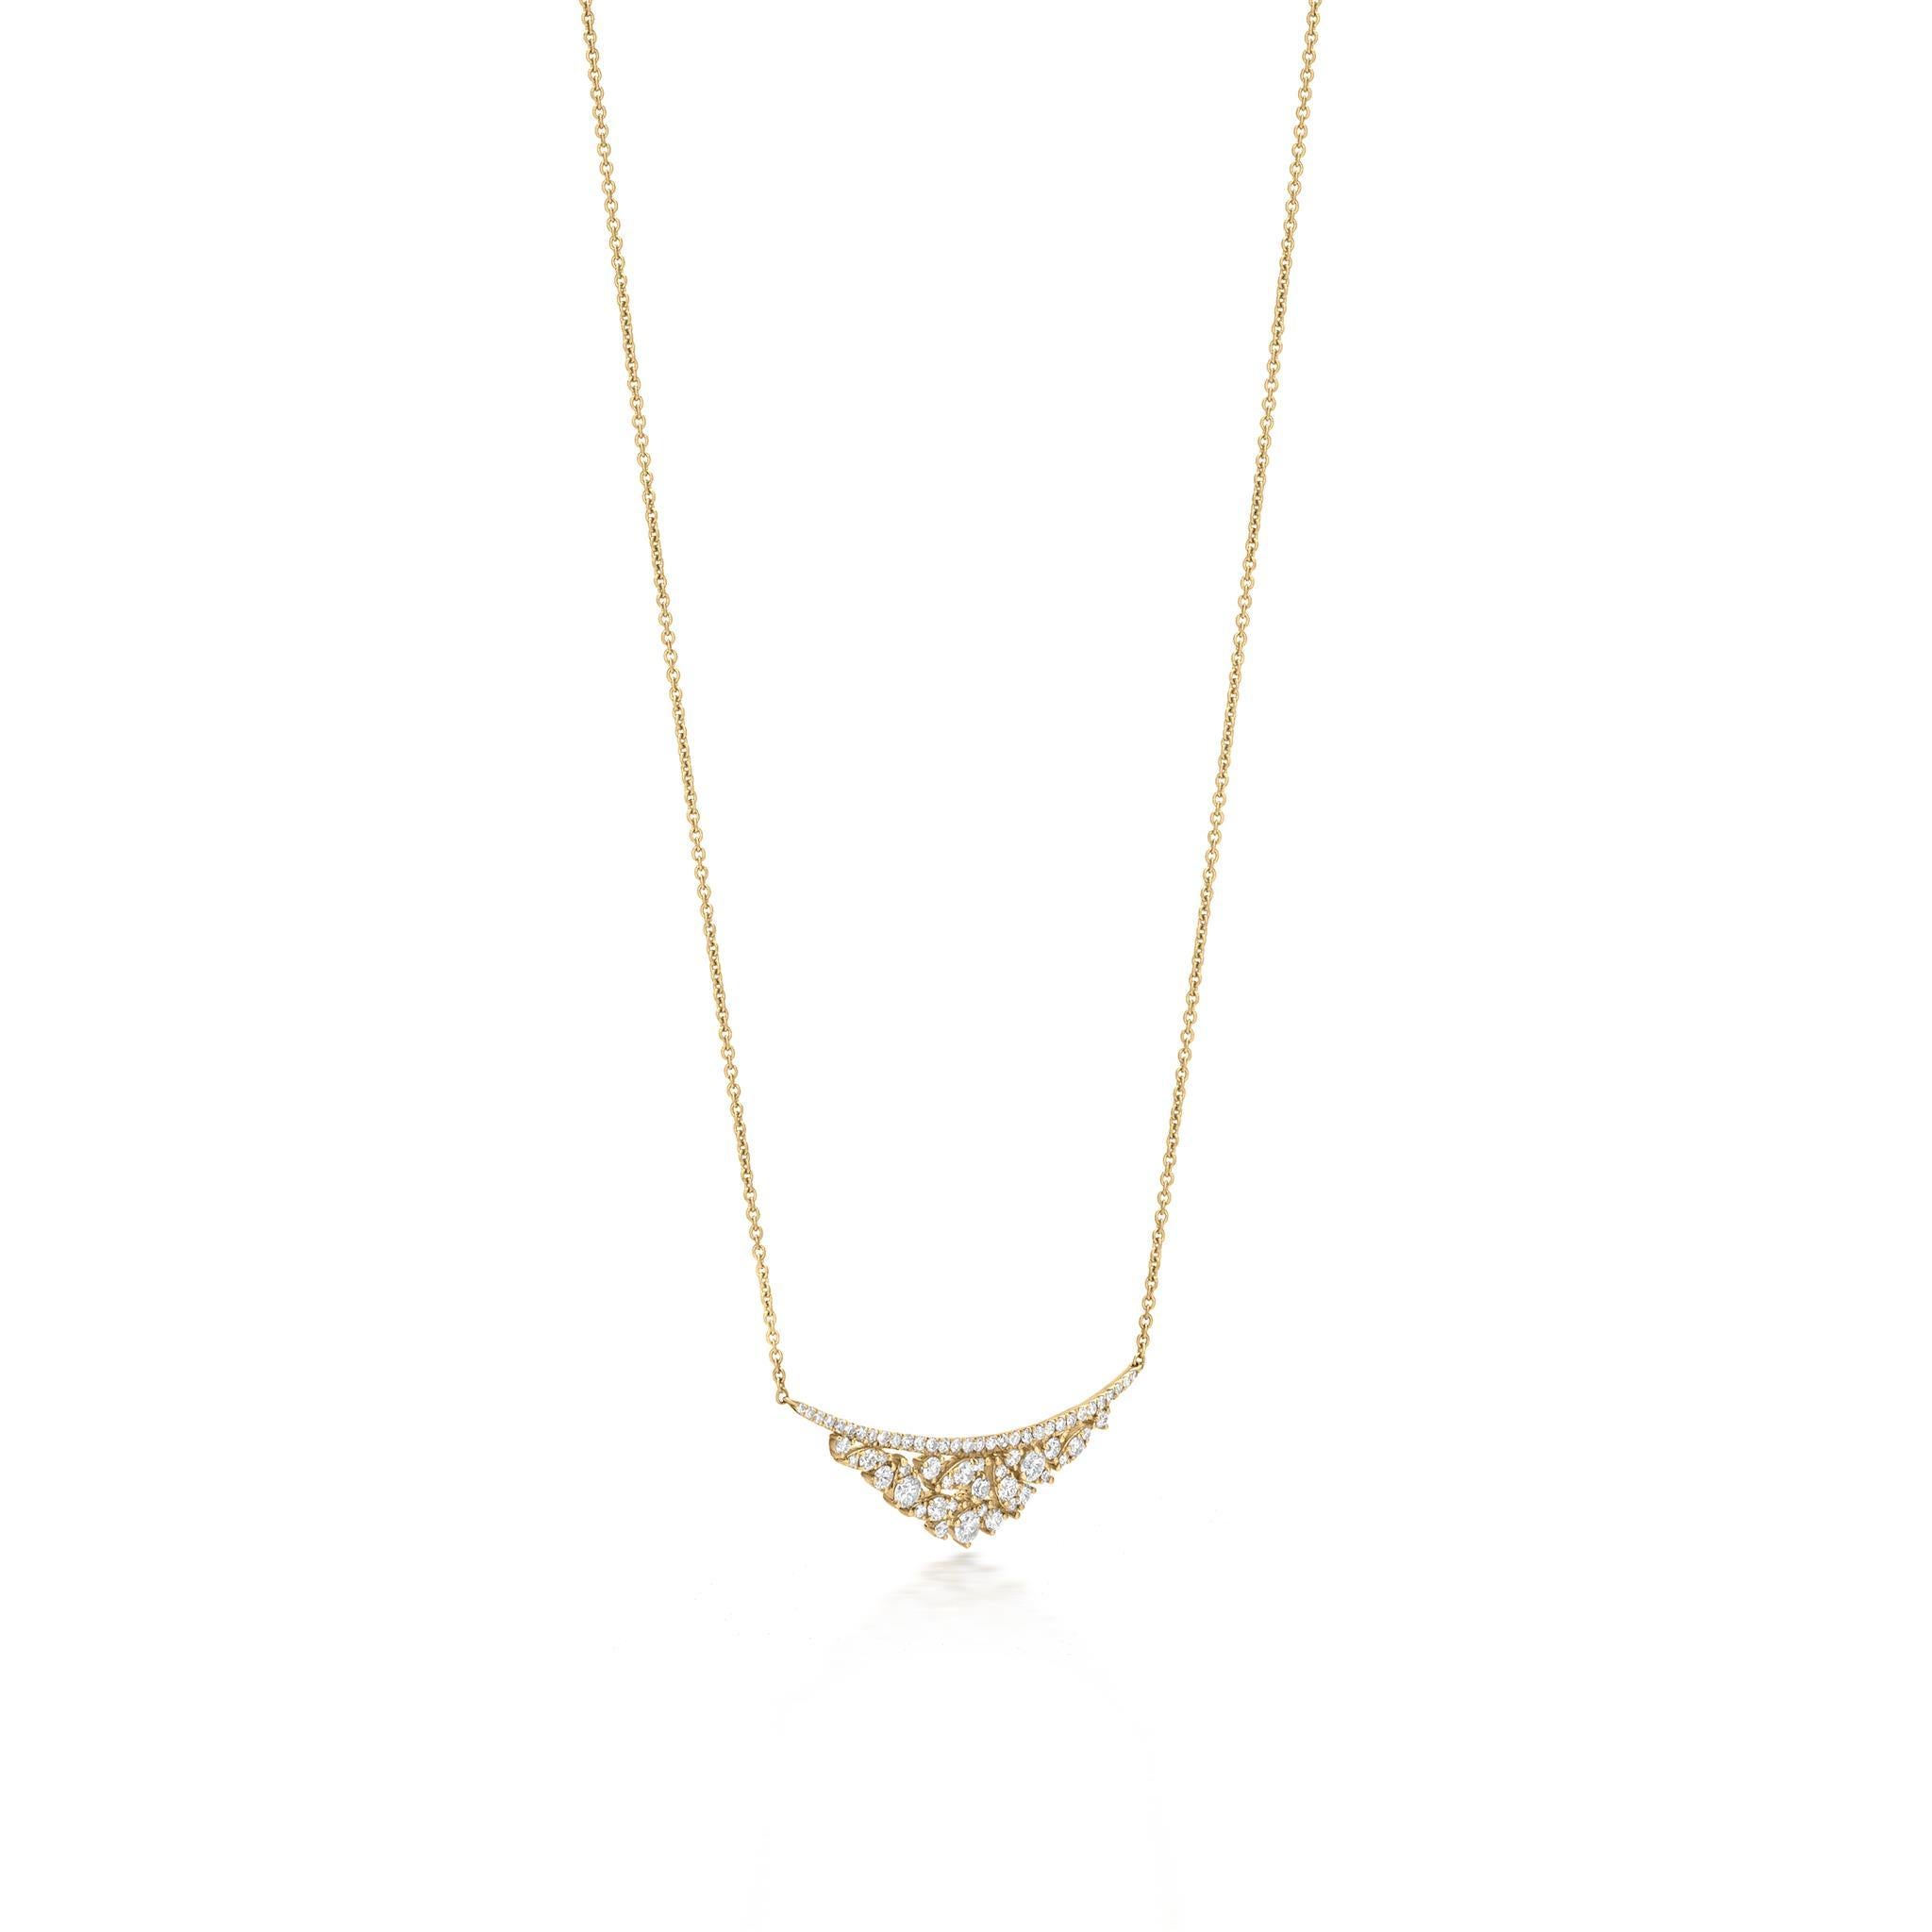 This Luxle Finely crafted in 18k yellow gold pendant necklace features bezels of diamond-embellished to depict V-shape hanging from a curved diamond bar on a cable chain. Lobster clasp, diamond bar pendant necklace.
Please follow the Luxury Jewels